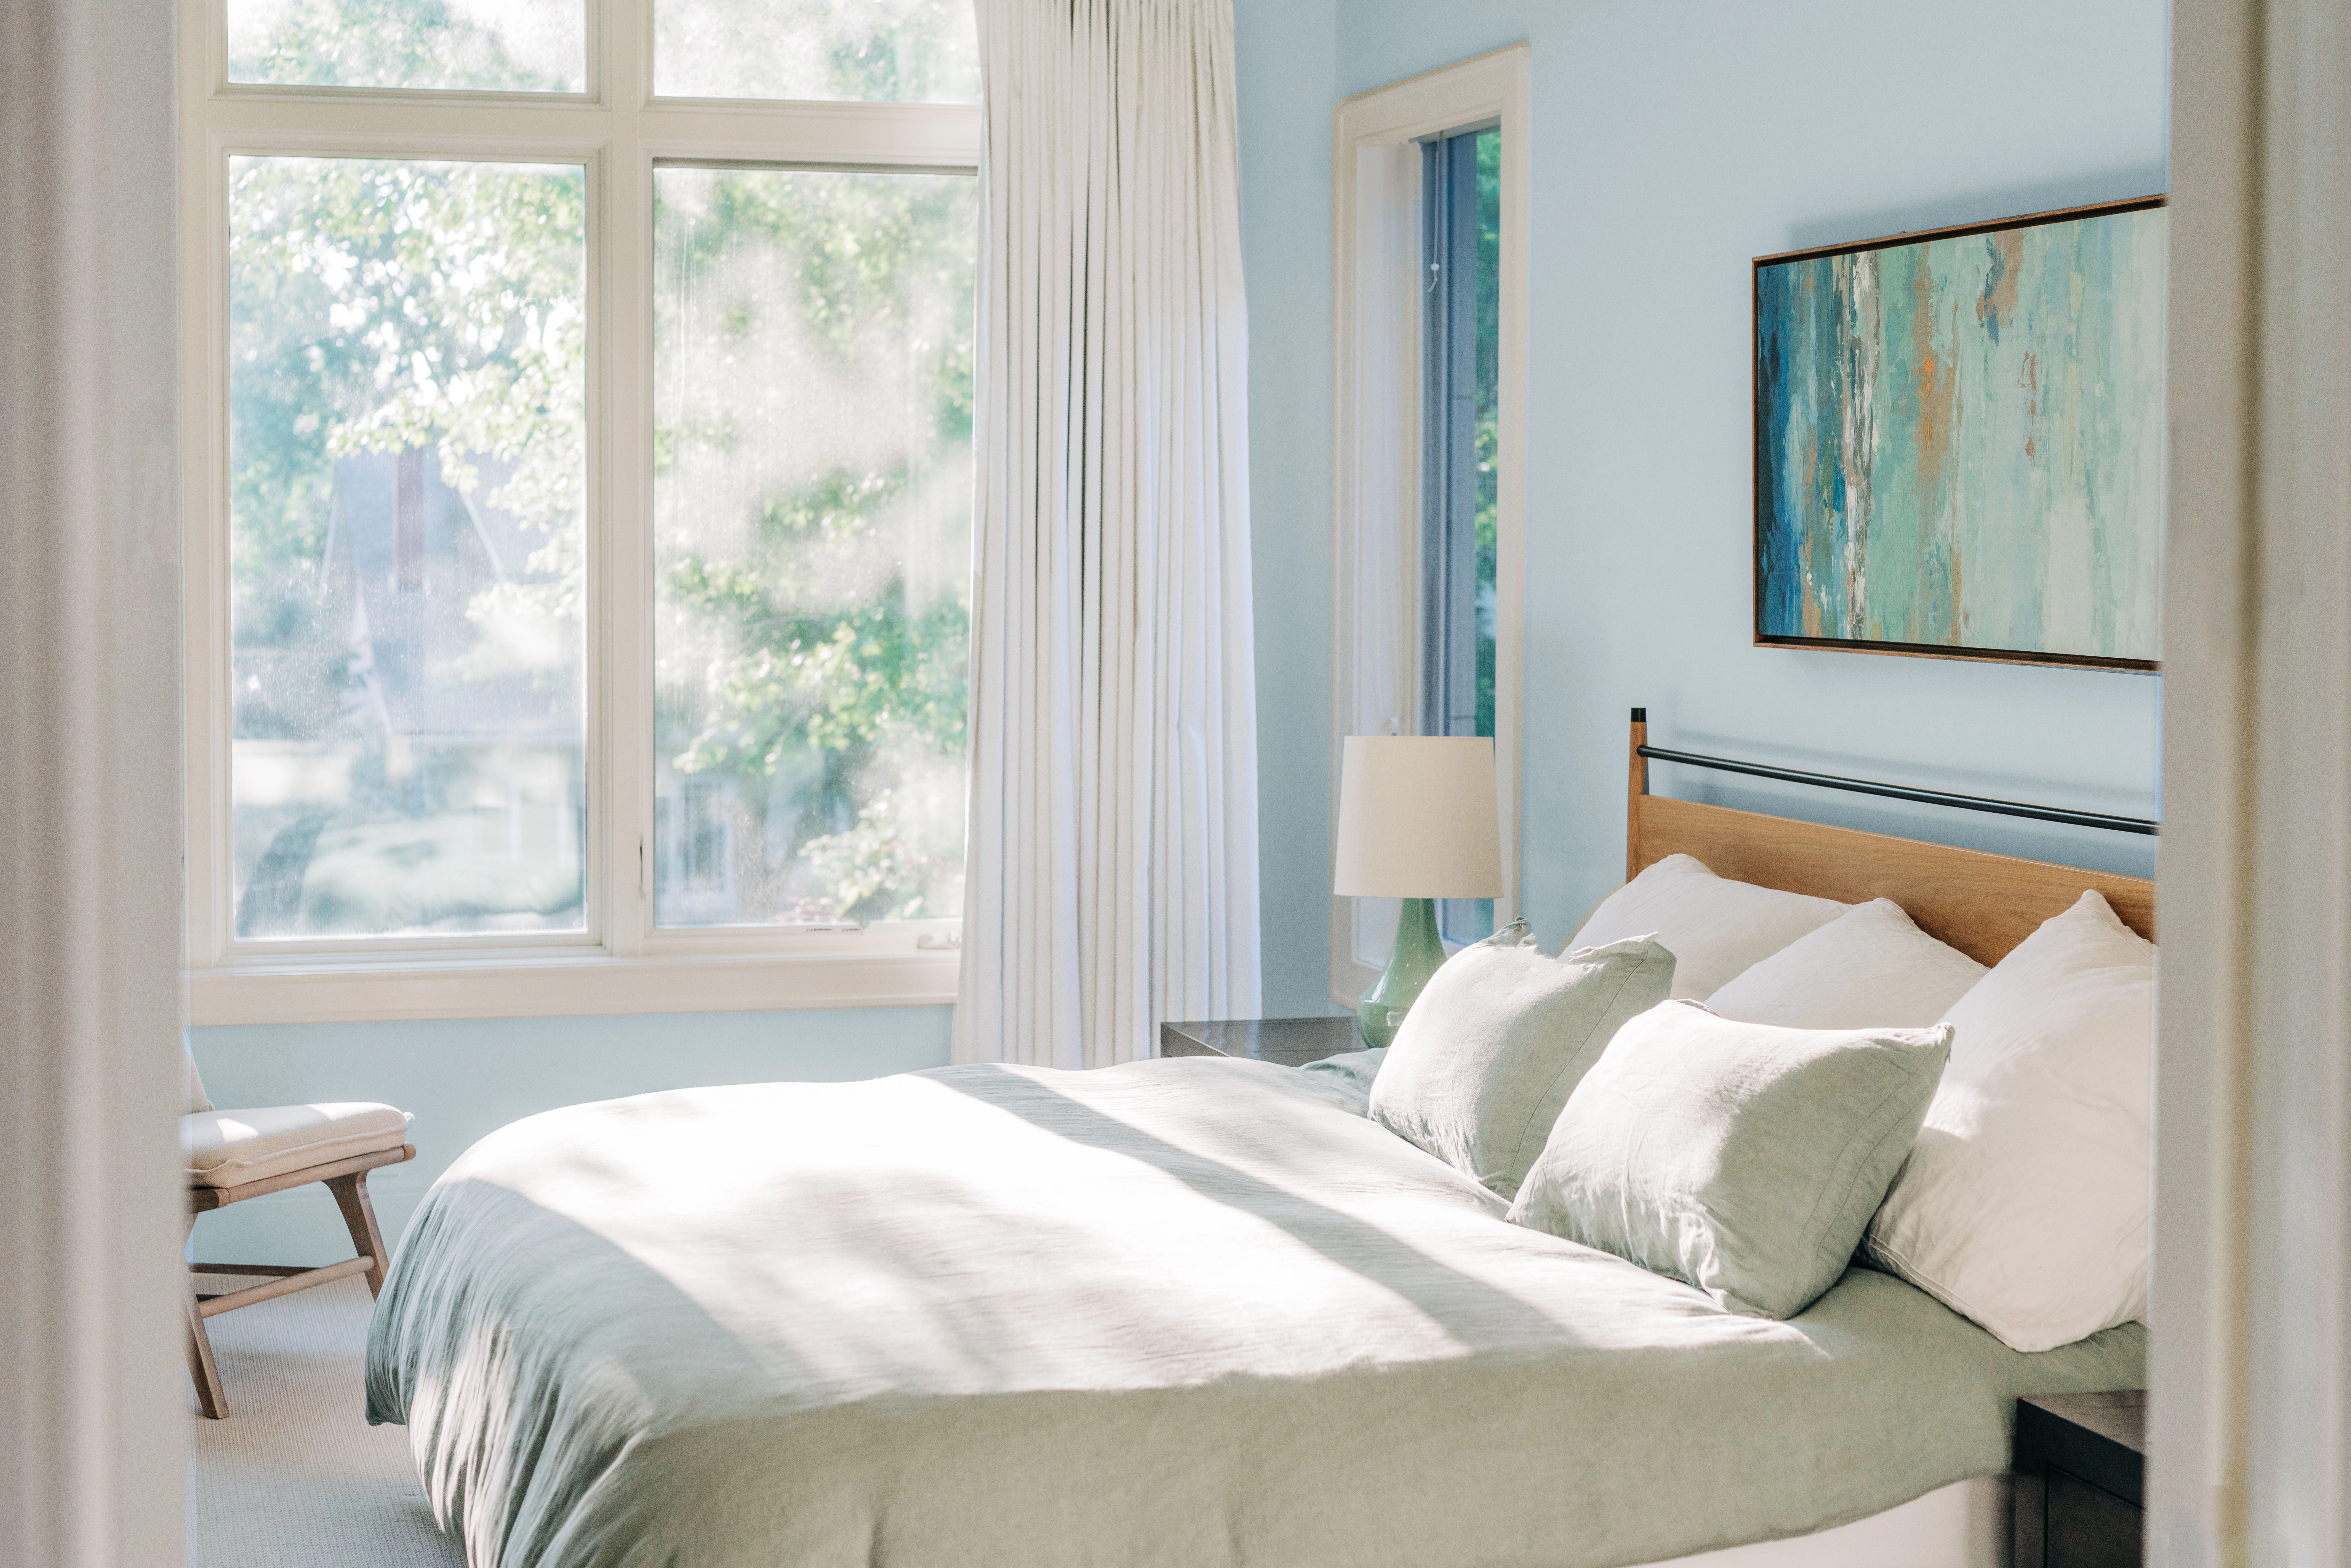 Sunny, light blue bedroom and soft white trim. There's a large window, bed, side tables, and chair.